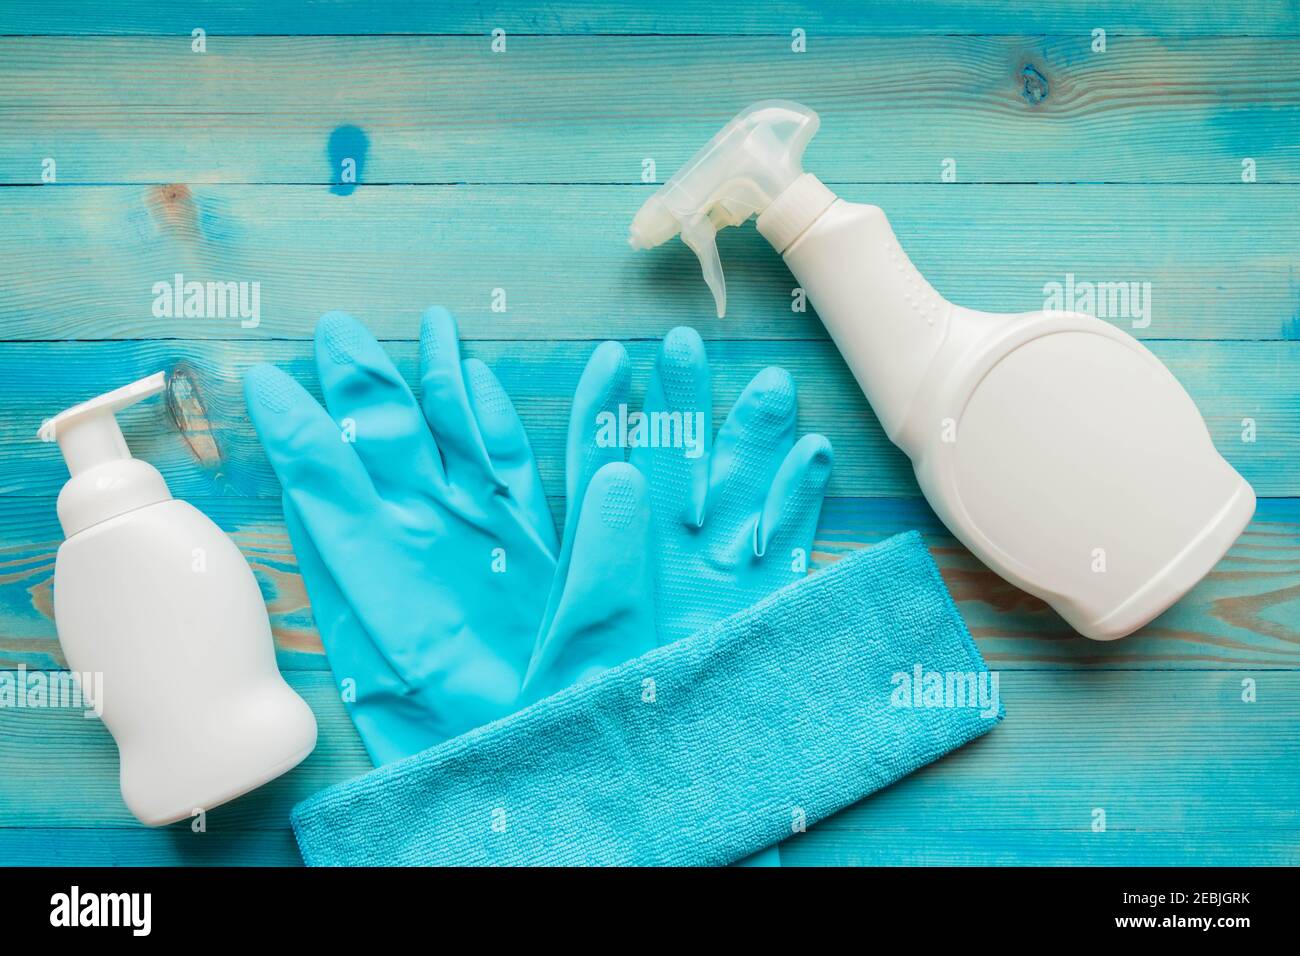 Cleaning products for disinfection. Blue rubber gloves, microfiber cloth and white spray bottles with disinfectant liquid on blue wooden background. H Stock Photo